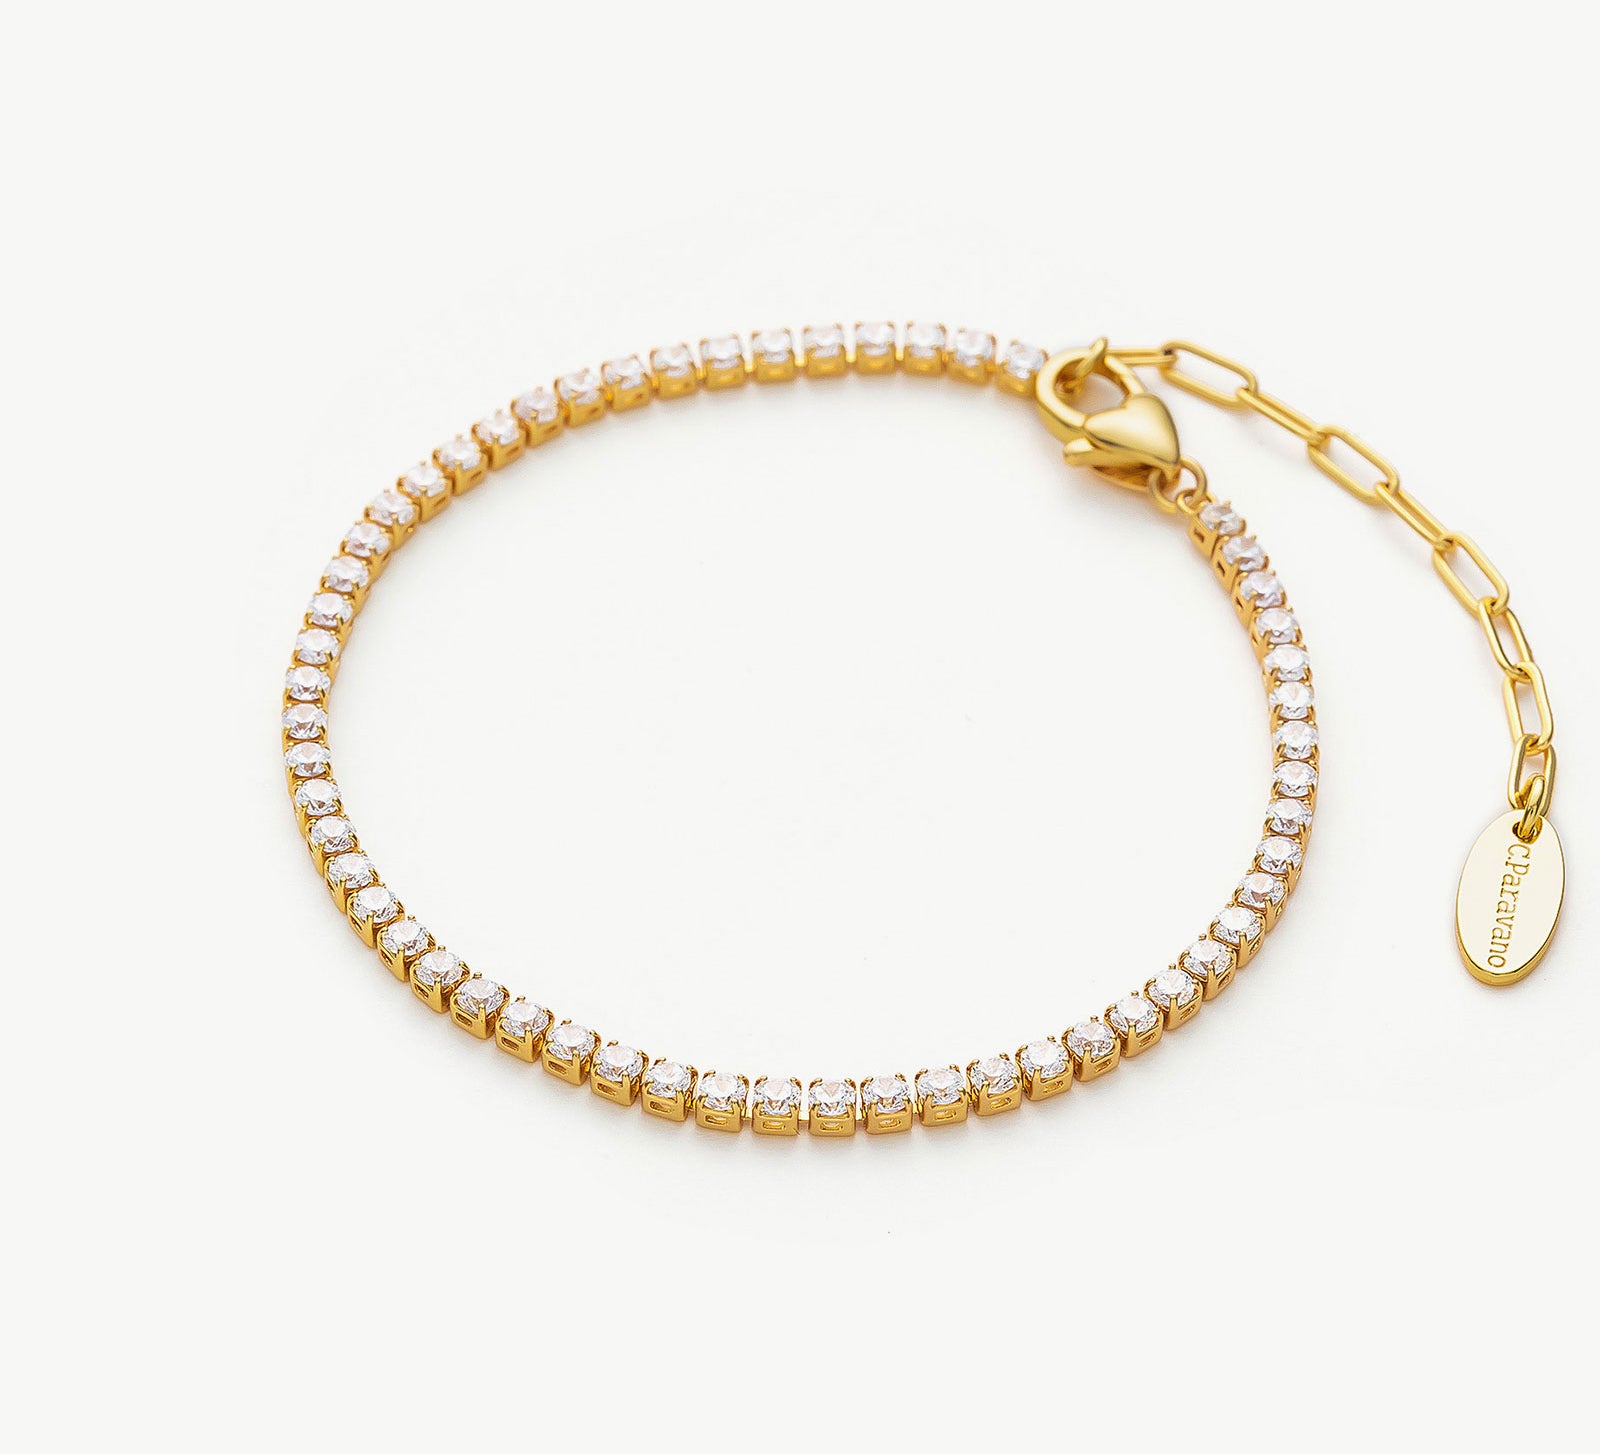 Crystal Twinkle Bracelet in Gold, a radiant piece that glistens with golden elegance, this bracelet features shimmering crystals set in a luxurious gold setting, adding a touch of glamour and opulence to your wrist.